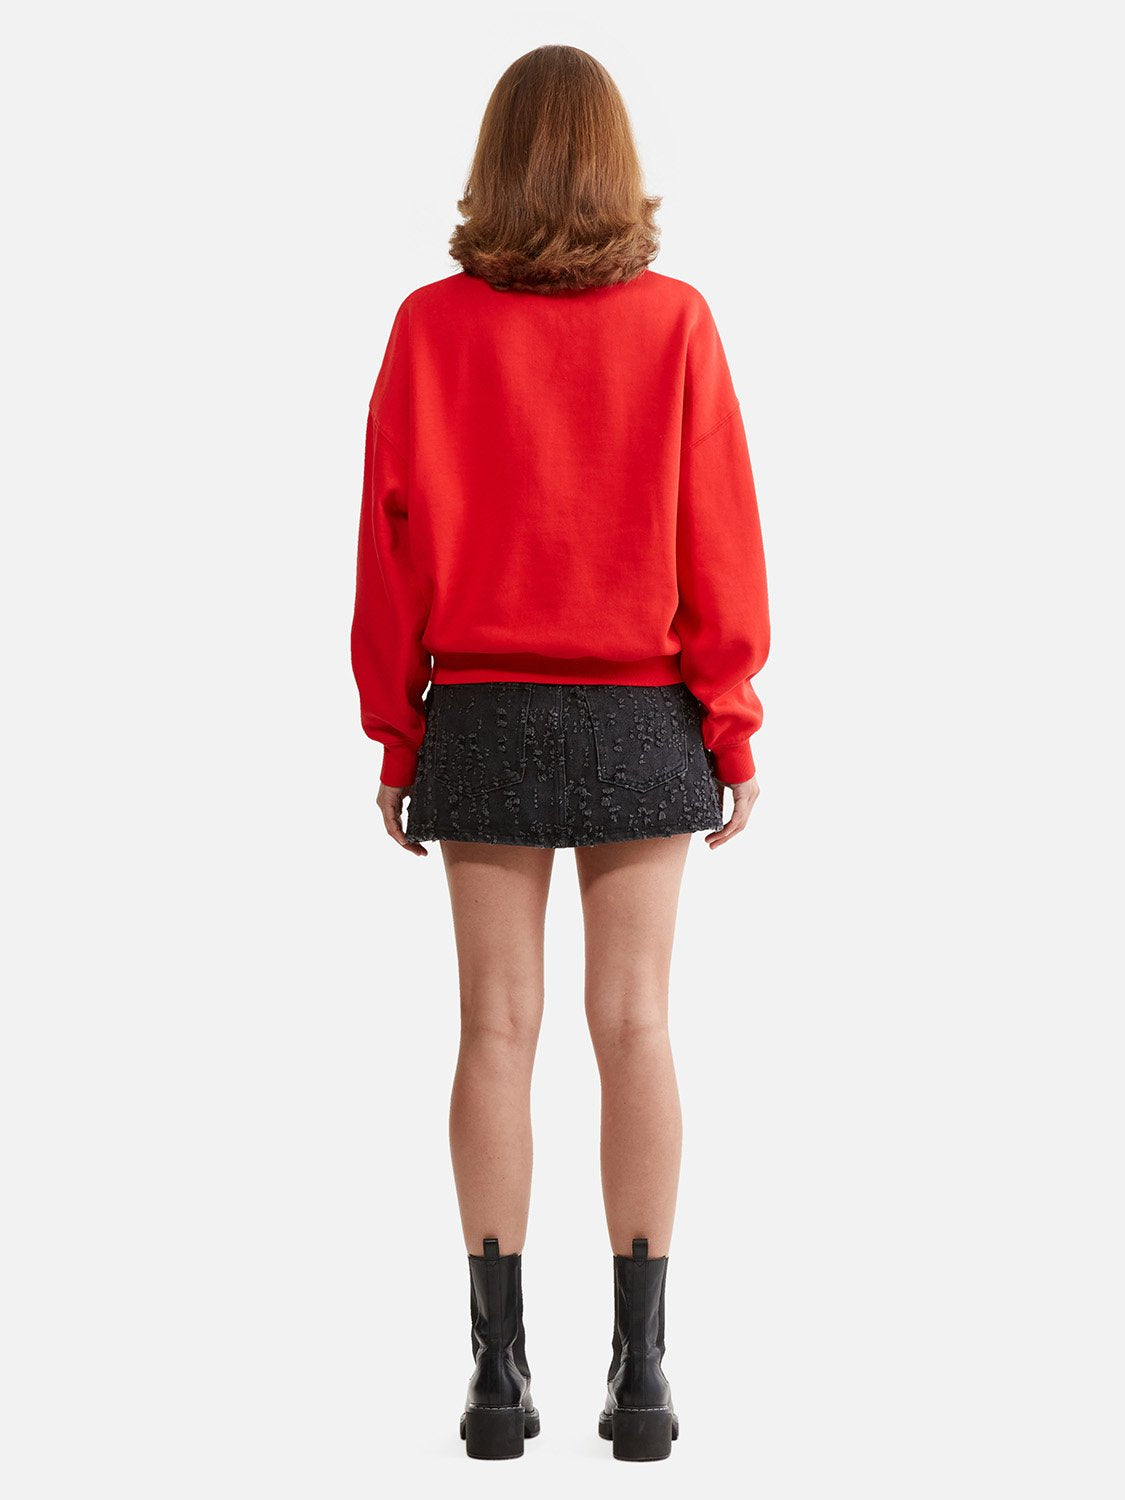 HB Sweat - Flame Red